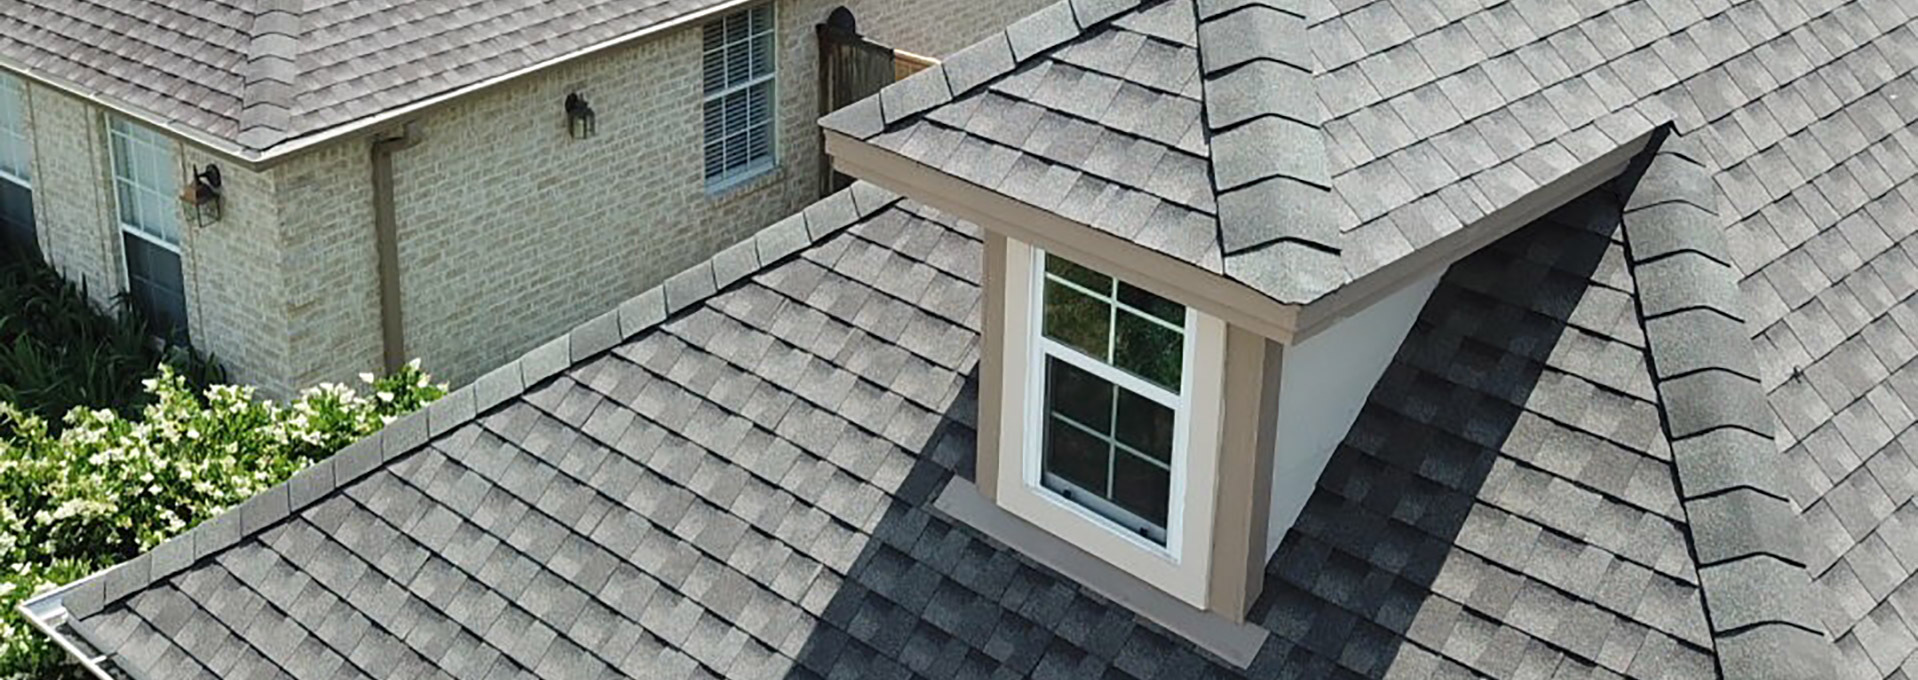 About Us - All Roofing \u0026 Remodeling